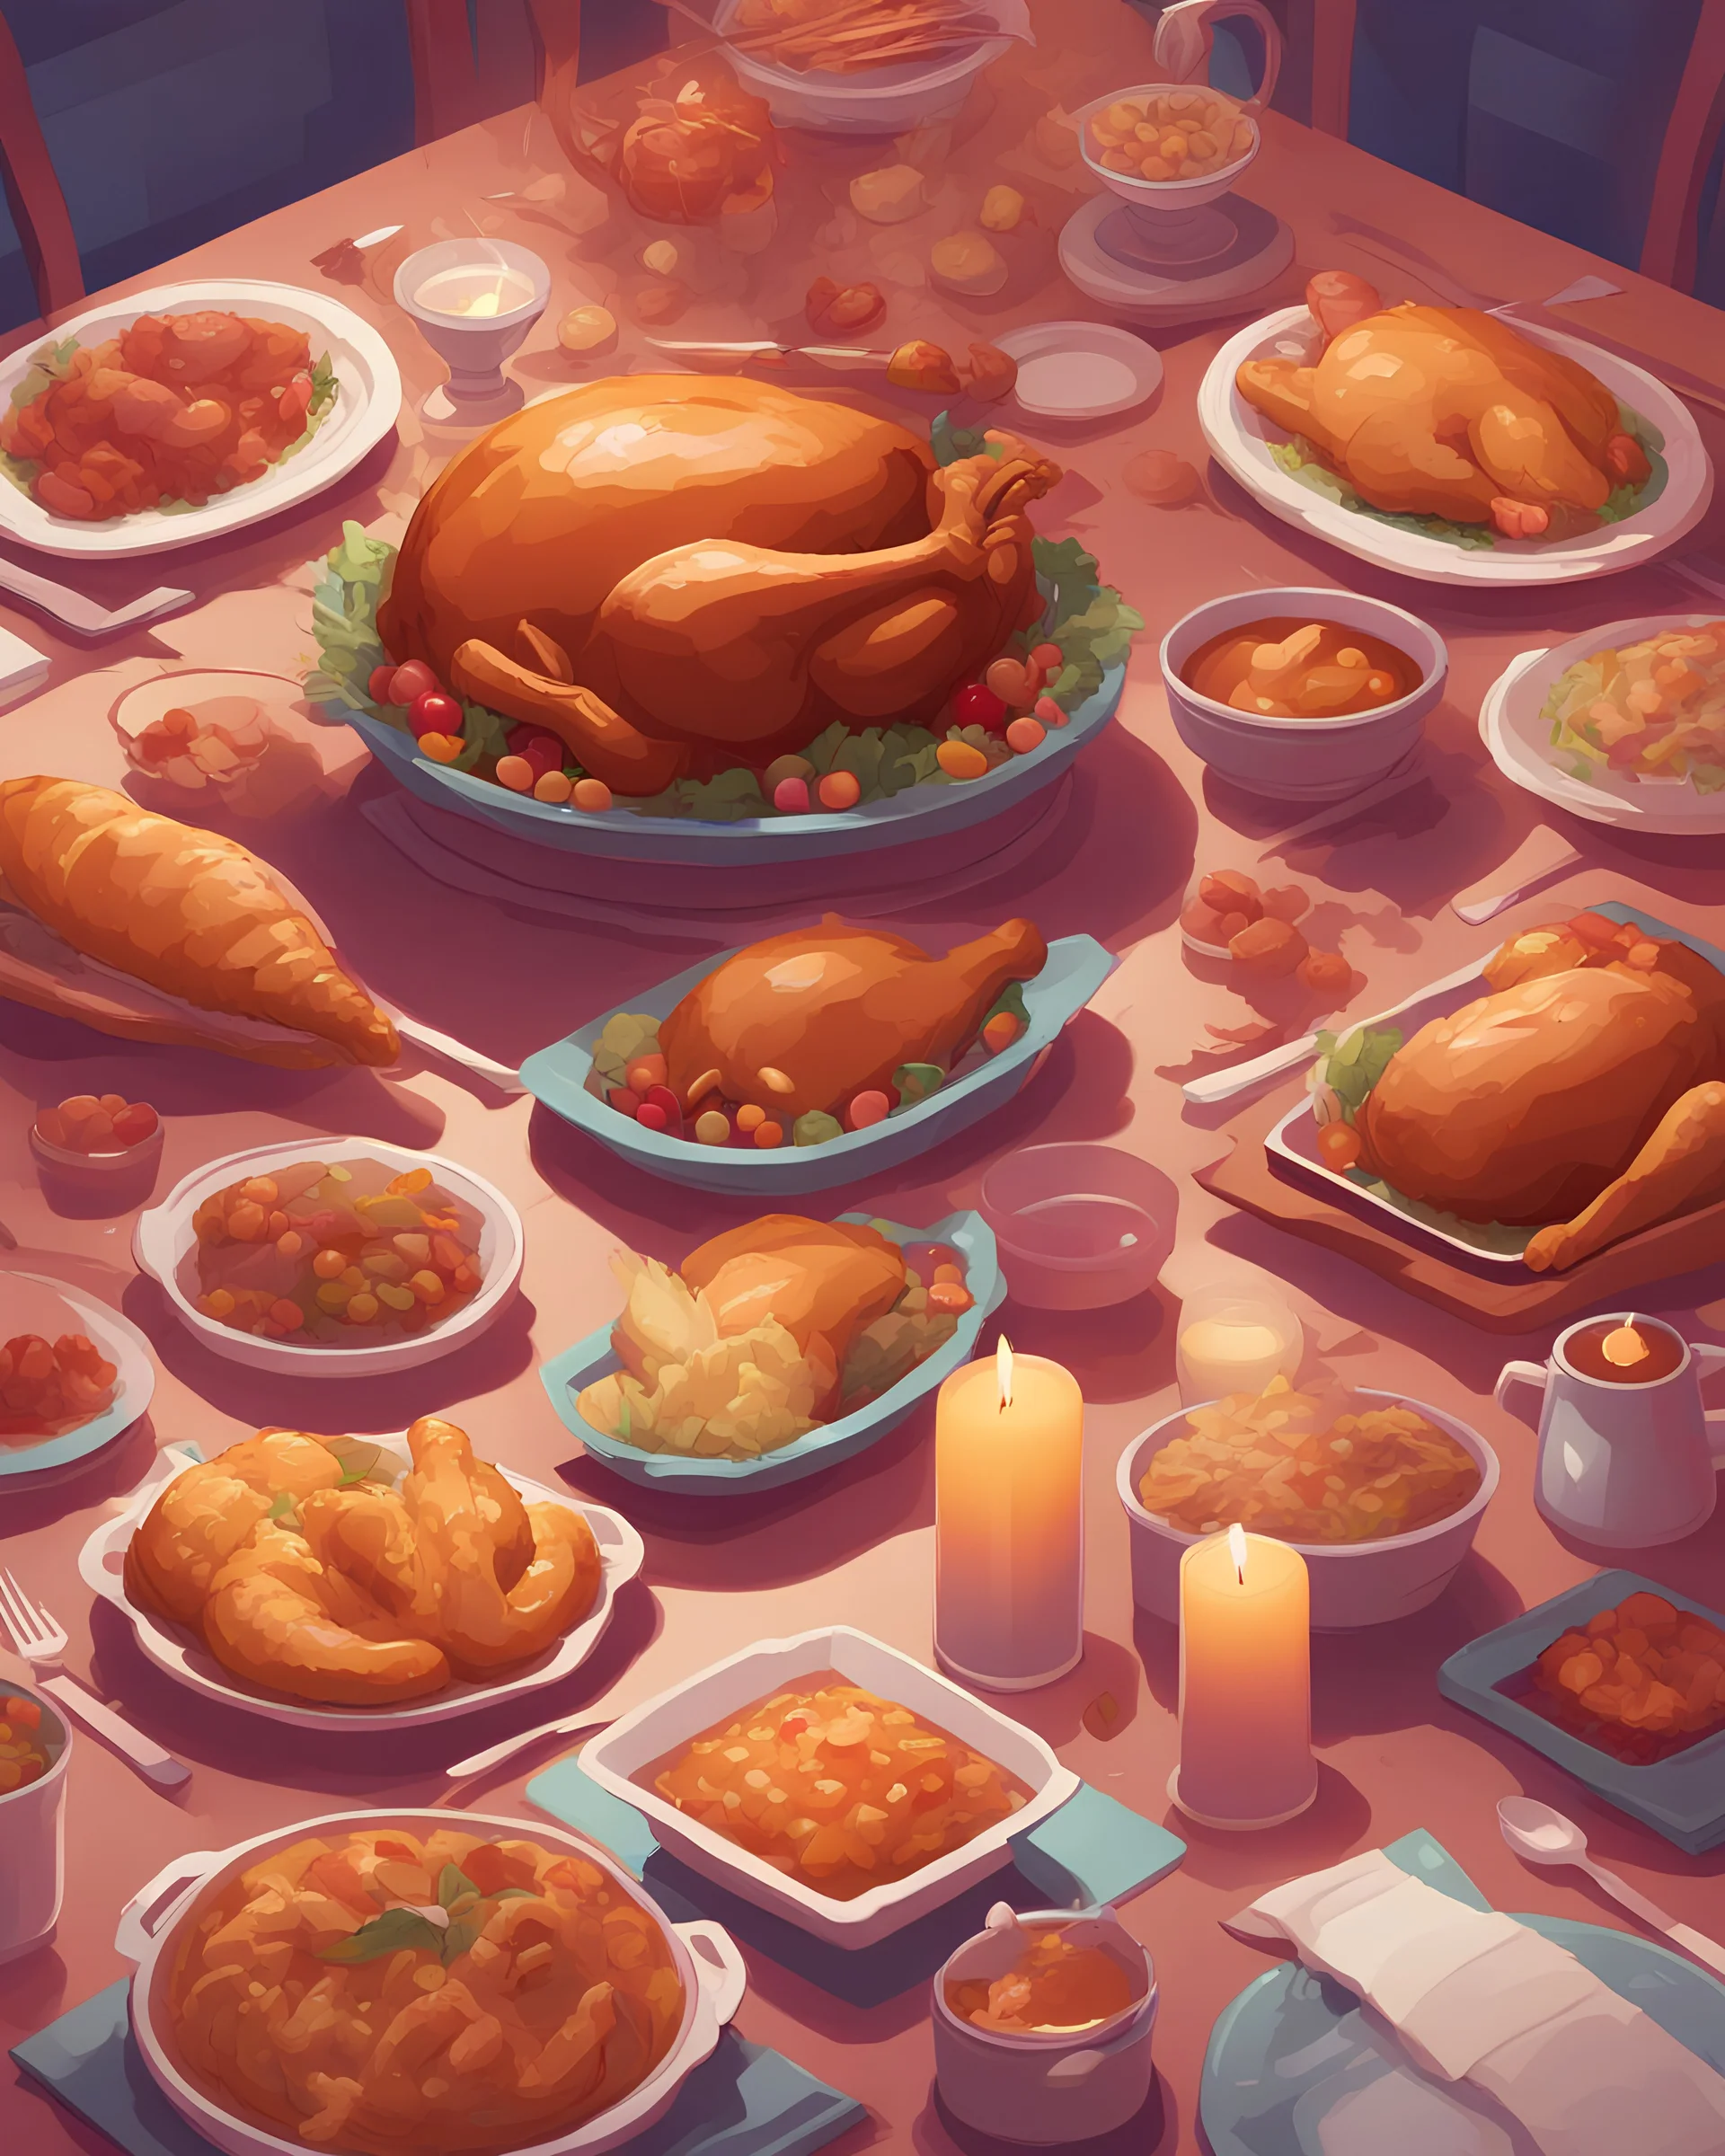 100+] Anime Thanksgiving Wallpapers | Wallpapers.com